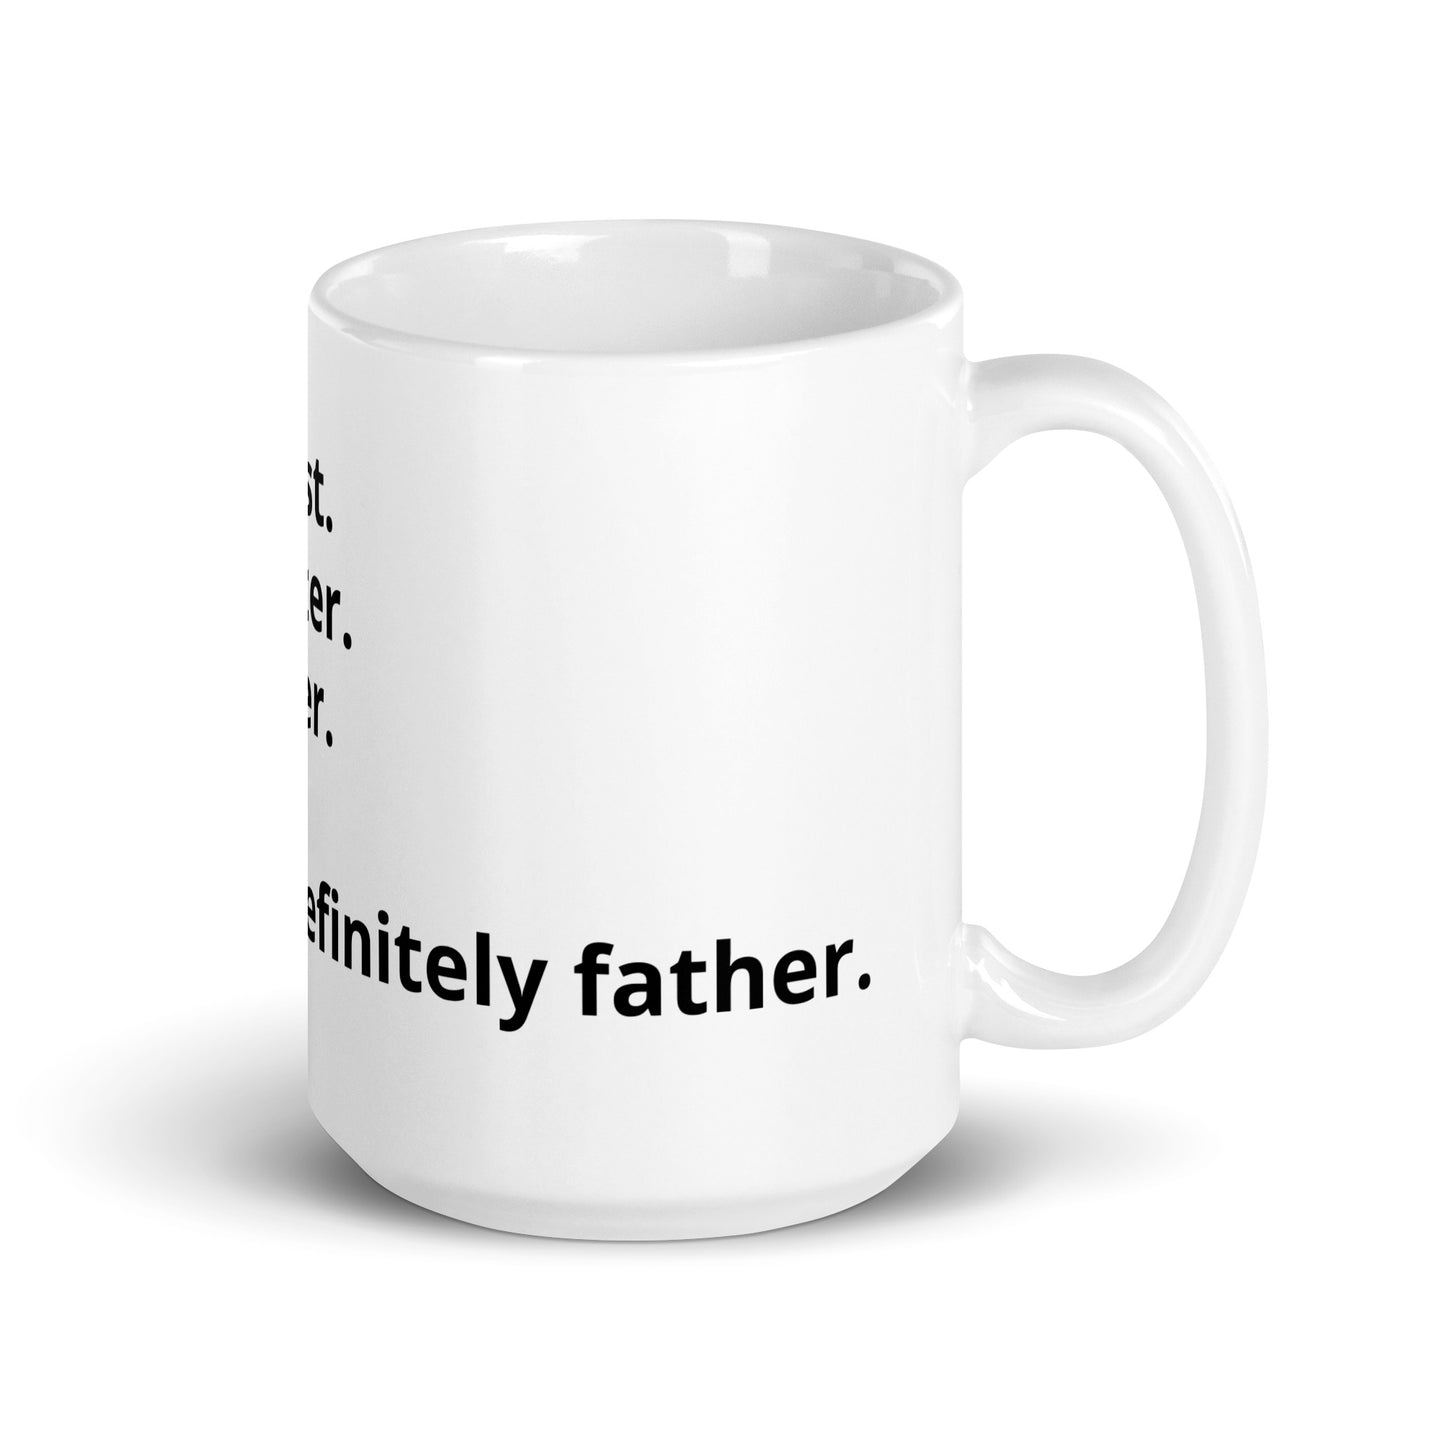 Best Farter (Father) Ever | White glossy coffee mug | Great gift for Dad